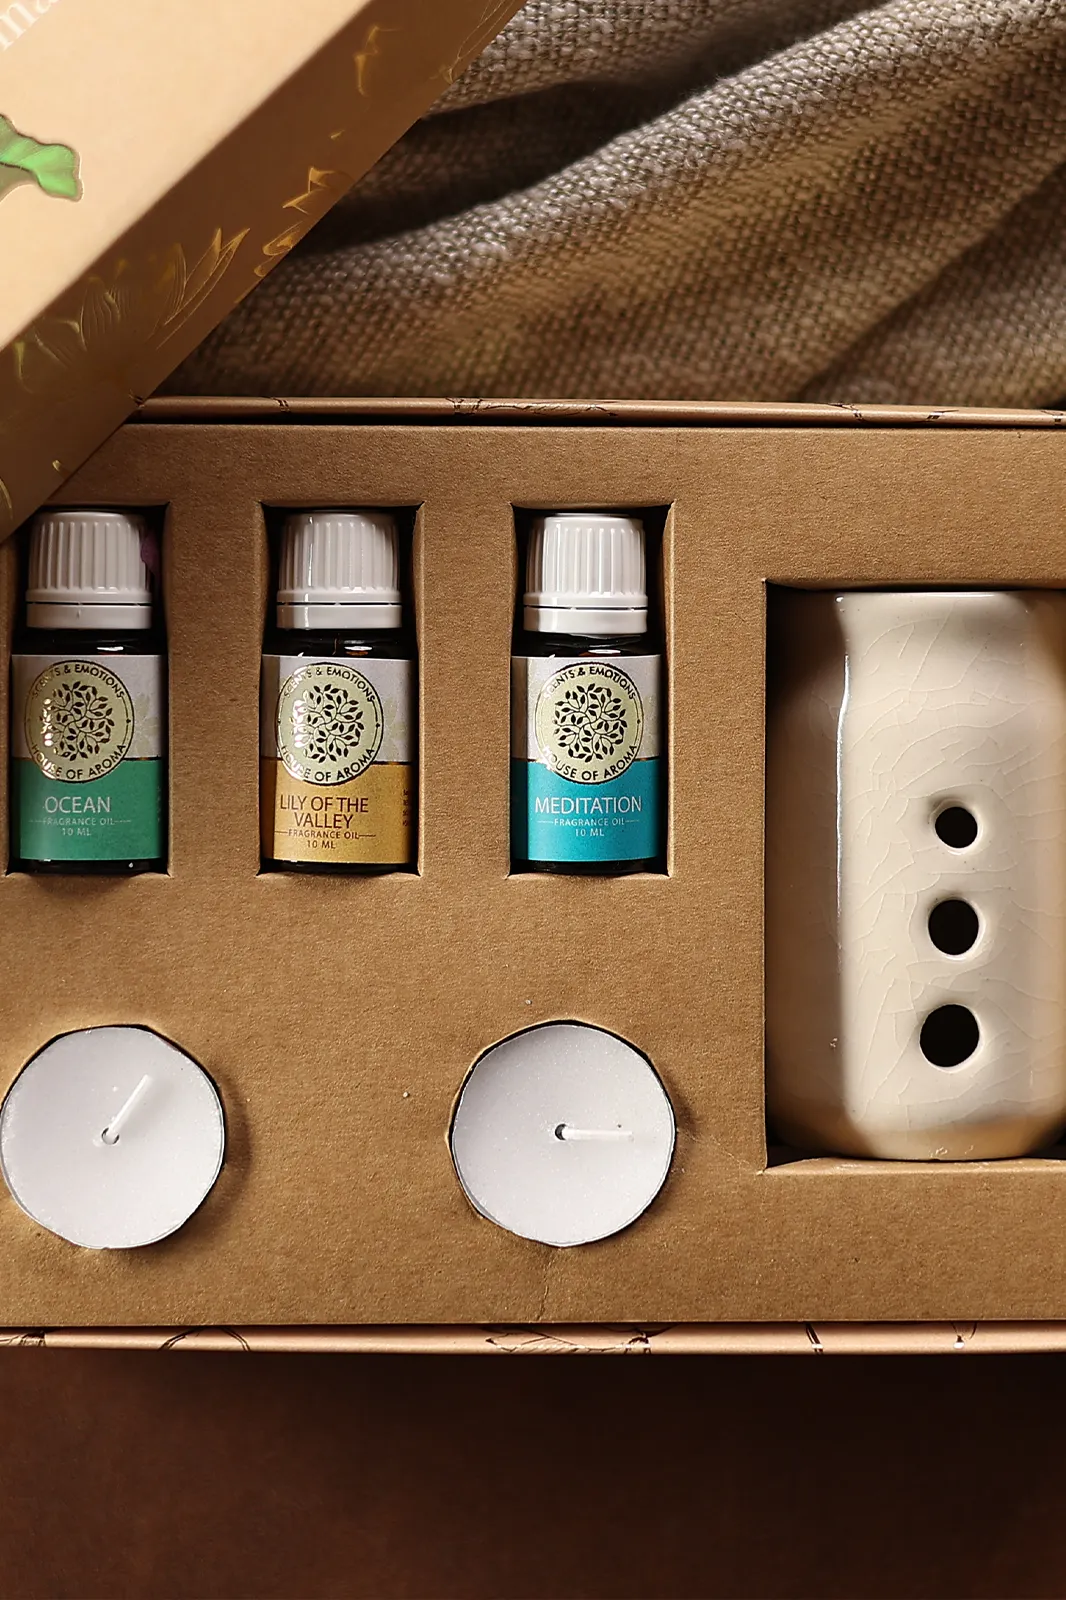 Sukham diffuser gift set with 3 fragrance oils, fragrance oil diffuser, aroma diffuser, home diffuser, ceramic diffuser, diffuser set, House of aroma, diffuser gift set, home fragrance diffuser, room diffuser, aroma diffuser for home, diffuser set with oils, house of aroma